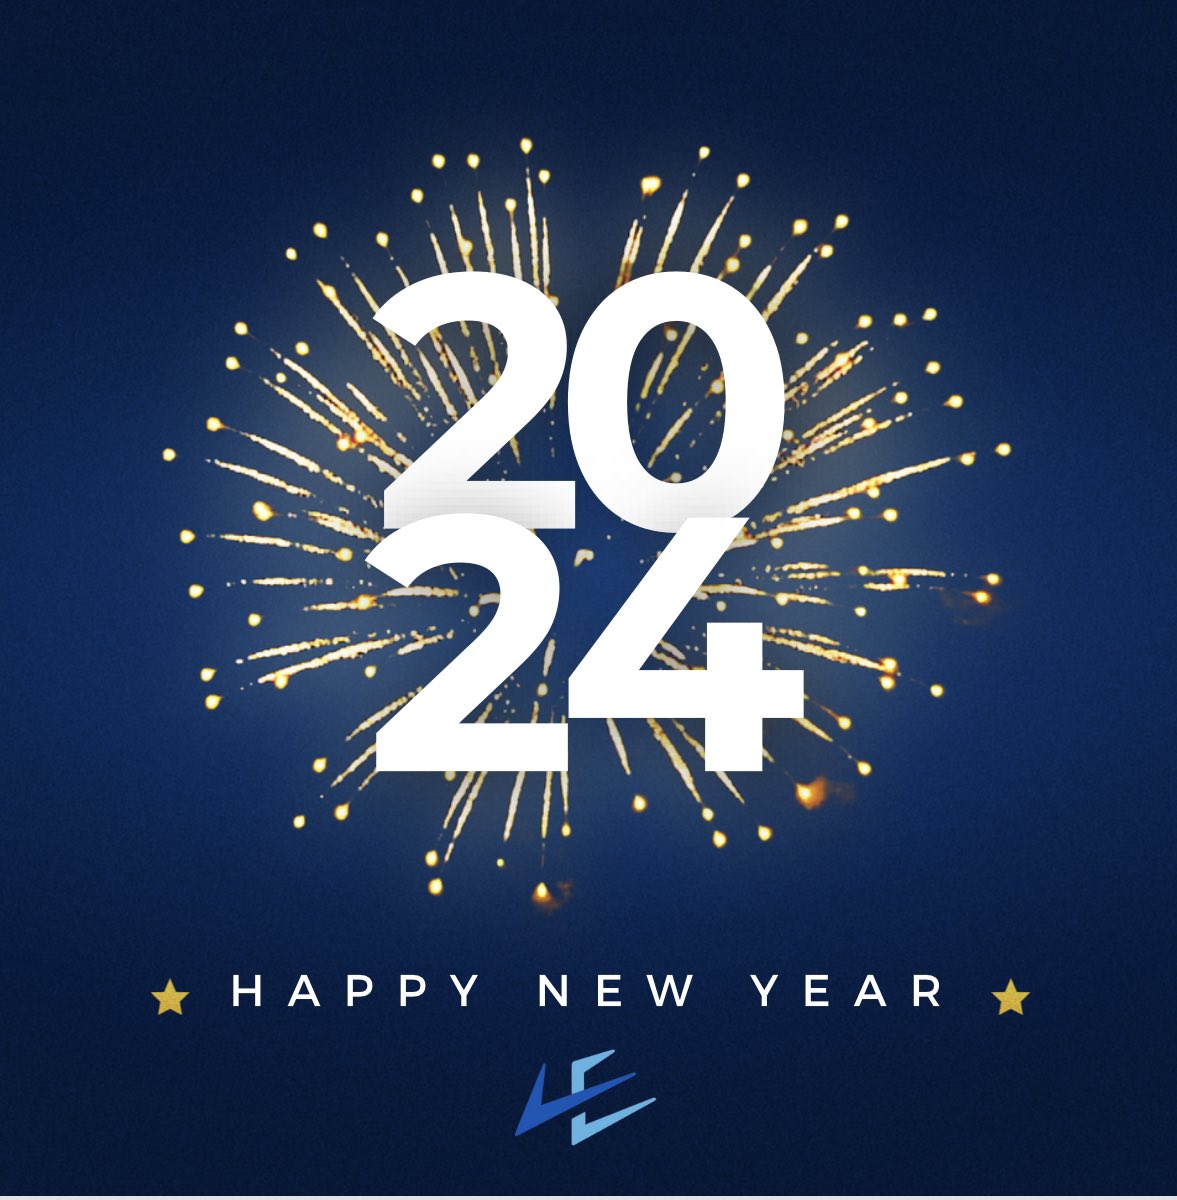 🎆Happy New Year! 🎊  What are your goals for 2024? ⁣
#happynewyear #2024goals #2024goalsetting #2024fundraising #fundraisinggoals